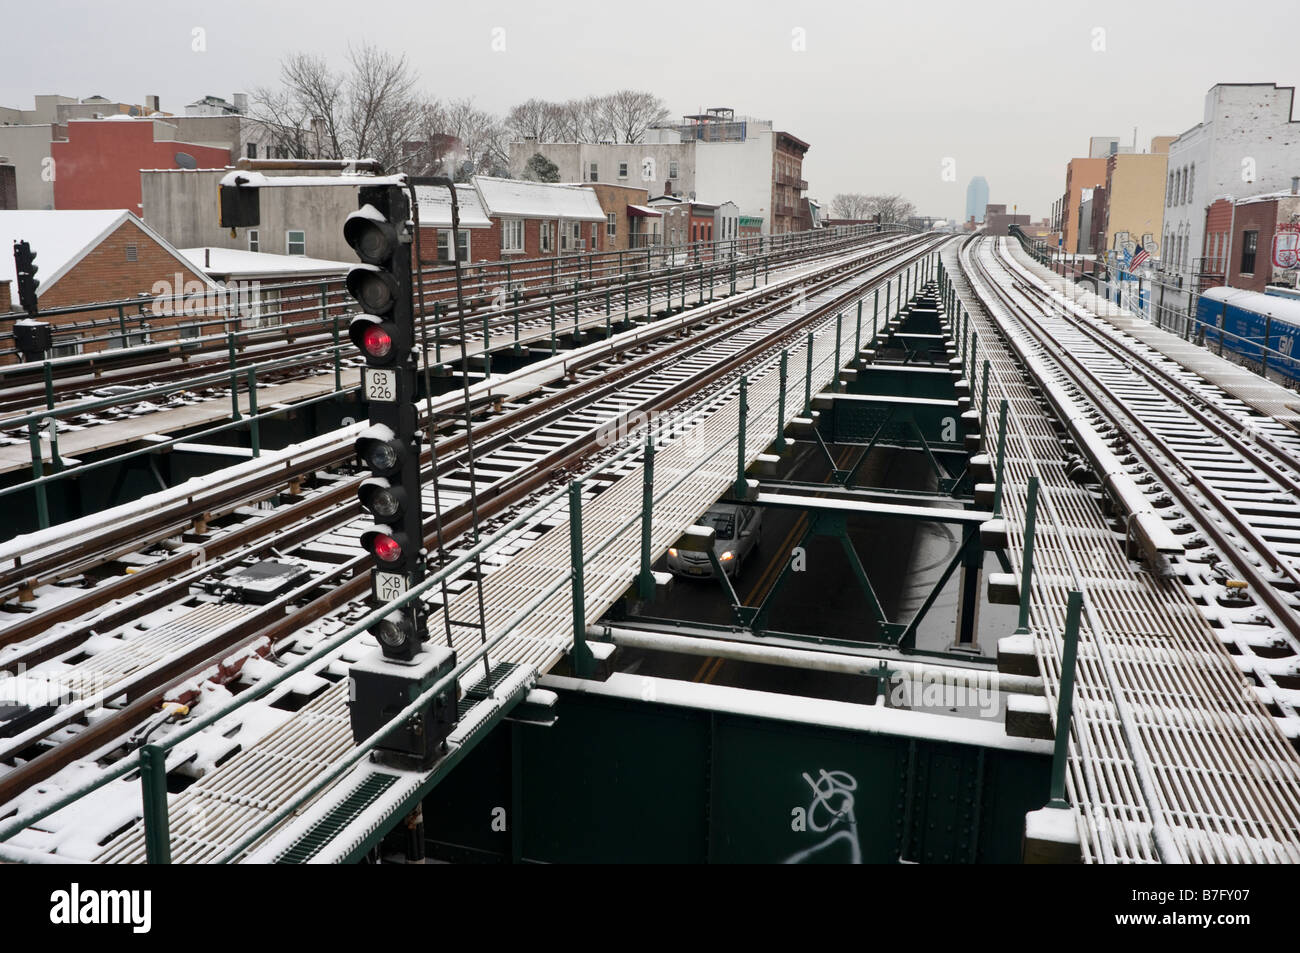 Astoria NY 18 January 2009 The elevated N train line in the snow in Queens ©Stacy Walsh Rosenstock/Alamy Stock Photo